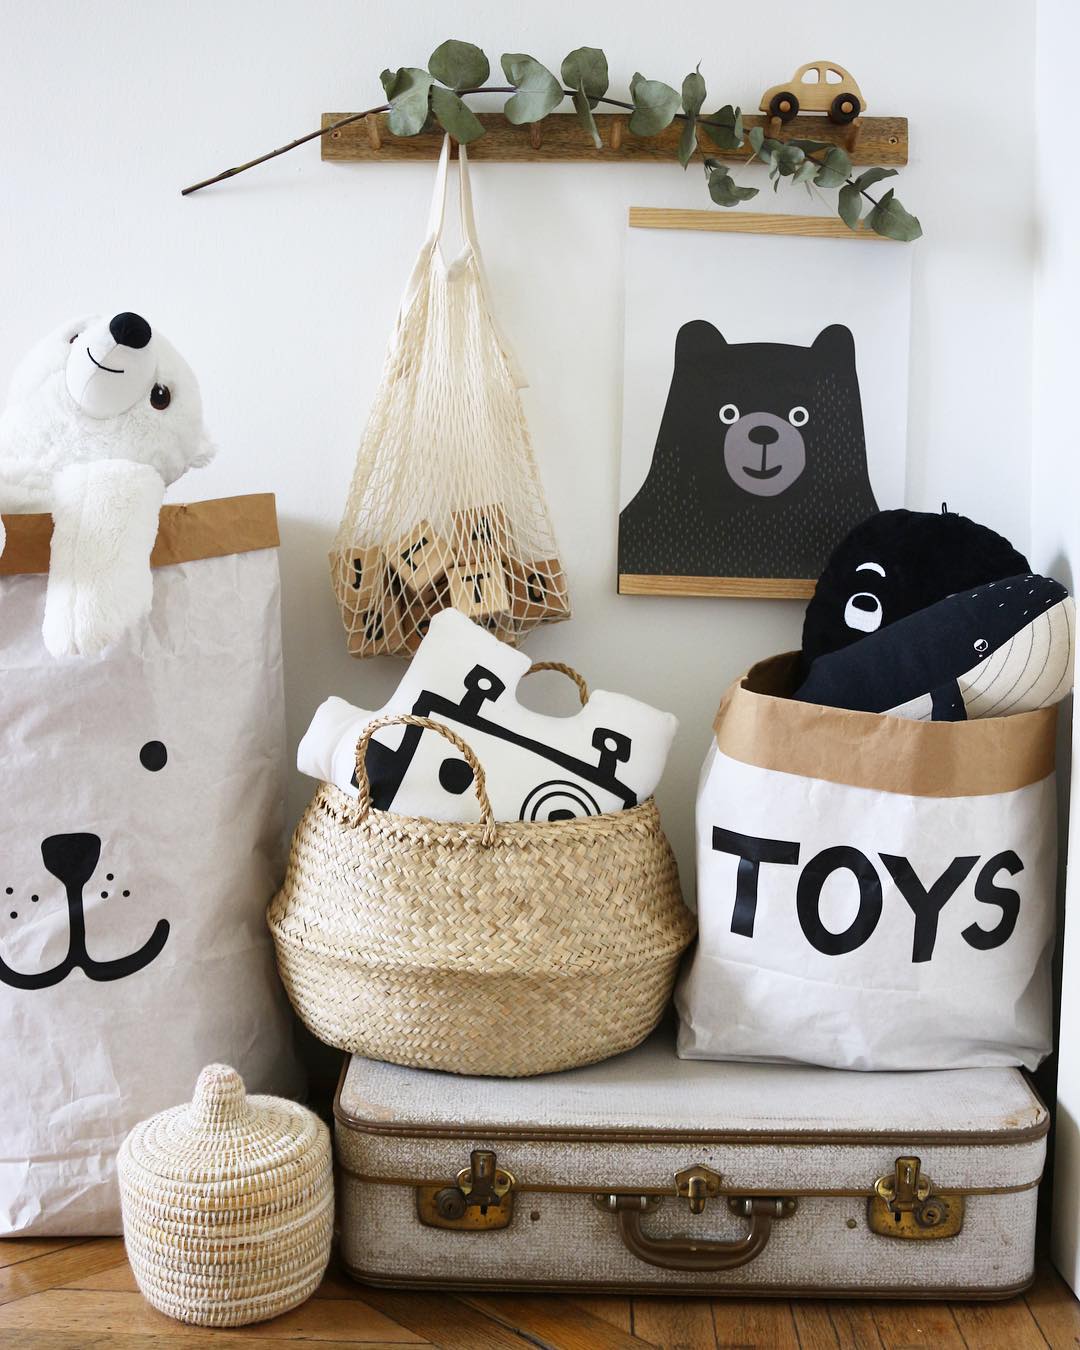 Totes with Stuffed Animals and Other Toys. Photo by Instagram user @stylepoetry